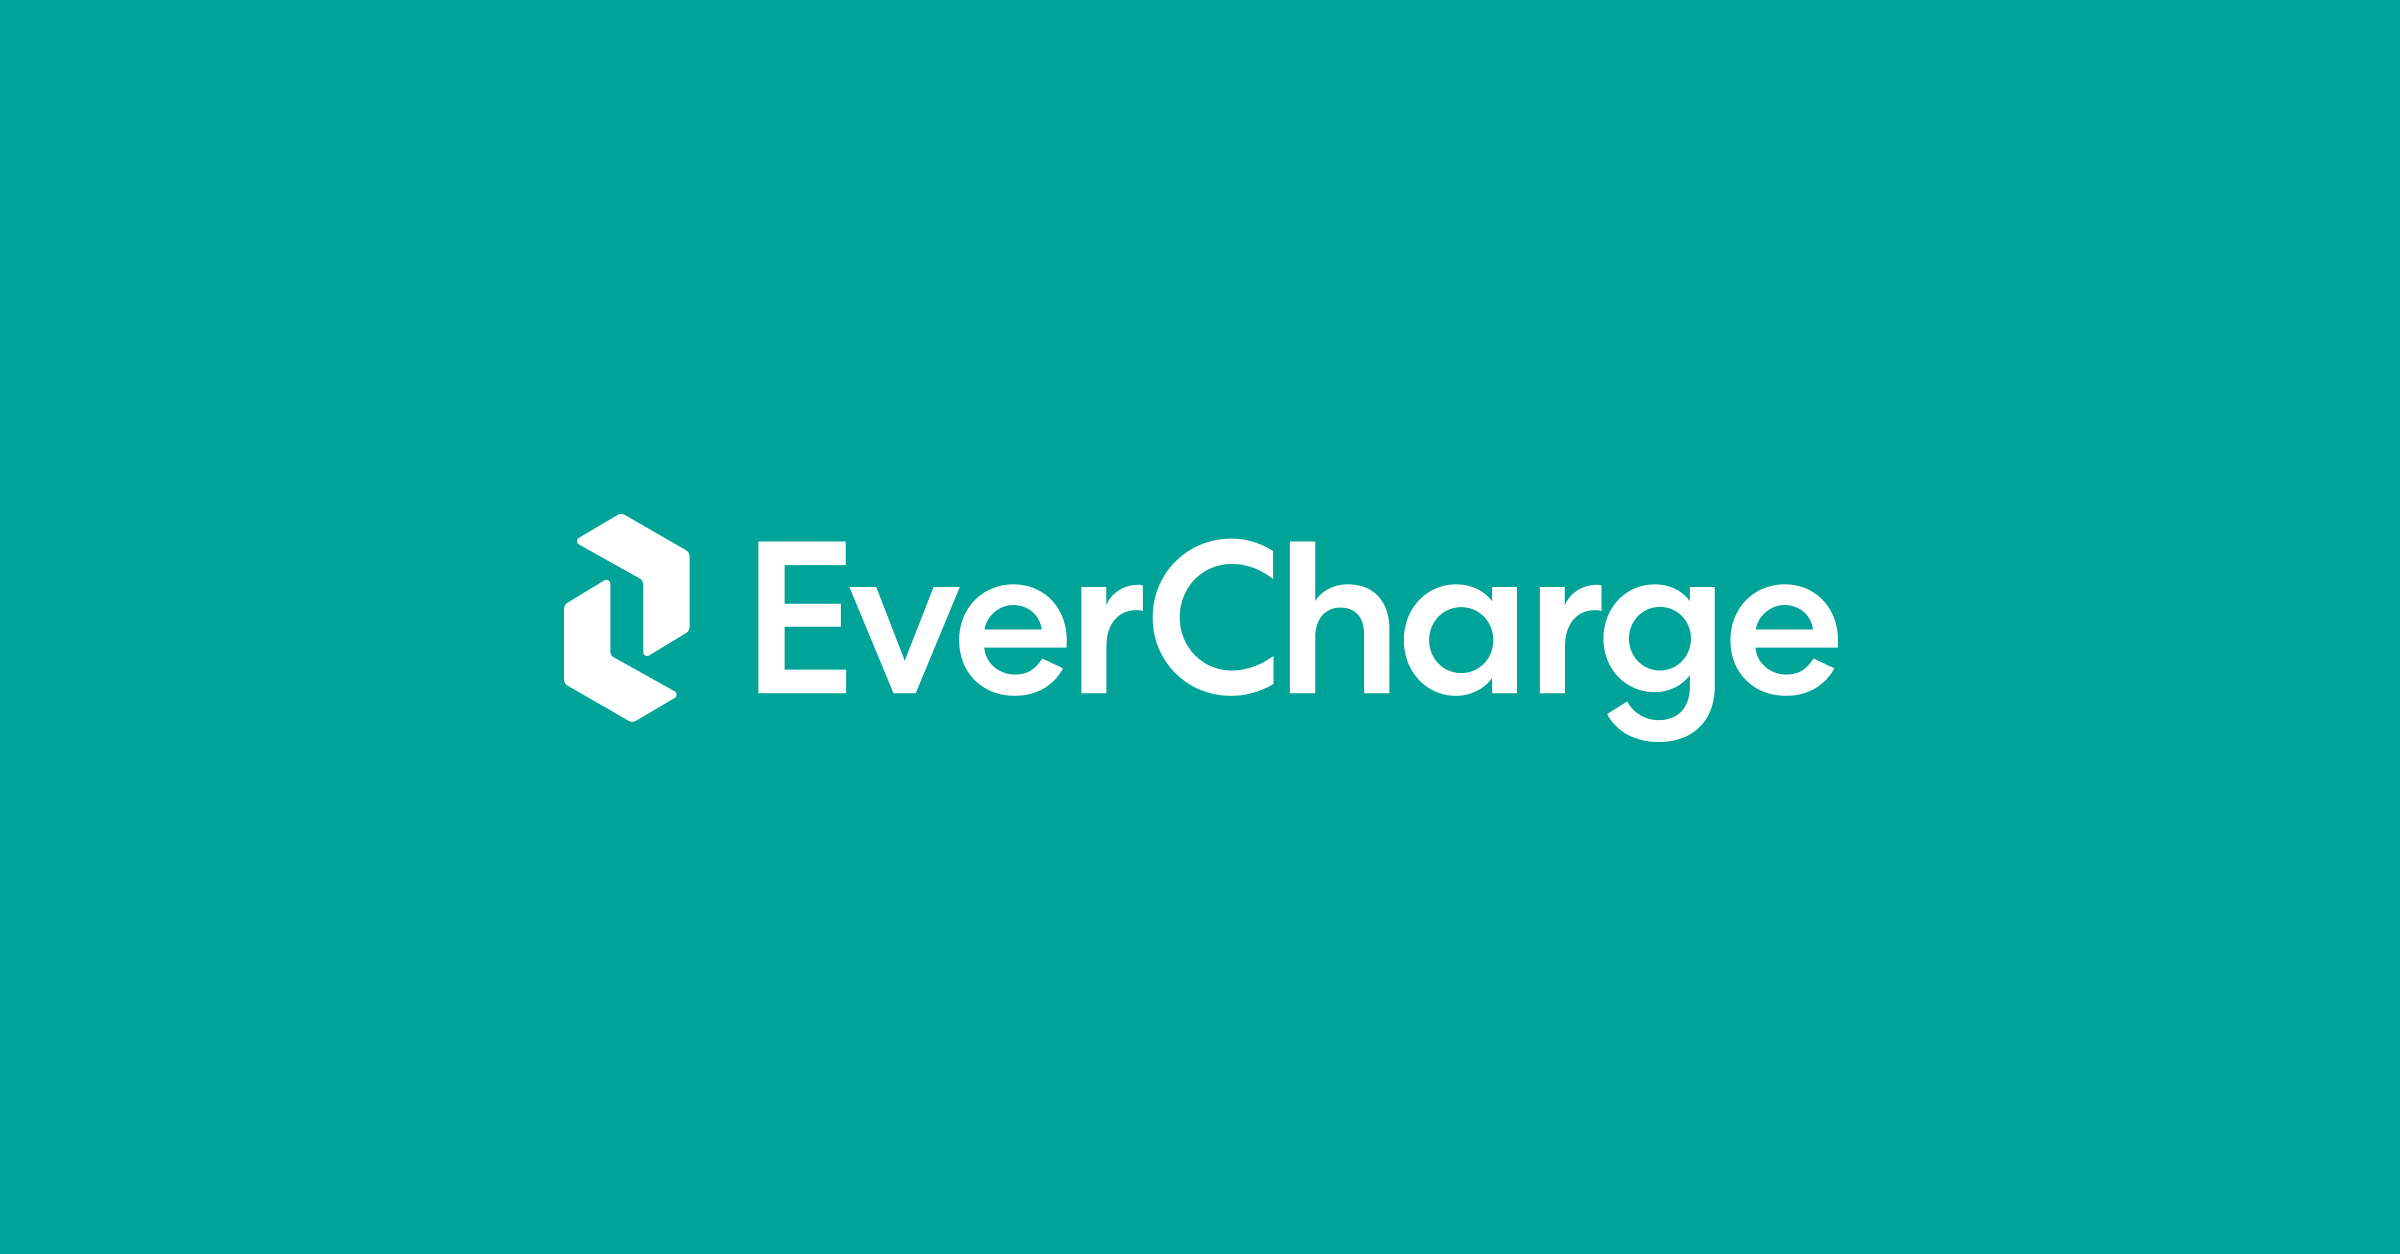 From Start to Scale: How EverCharge’s New Automated Load Study Further Simplifies and Accelerates EV Charging Infrastructure Planning